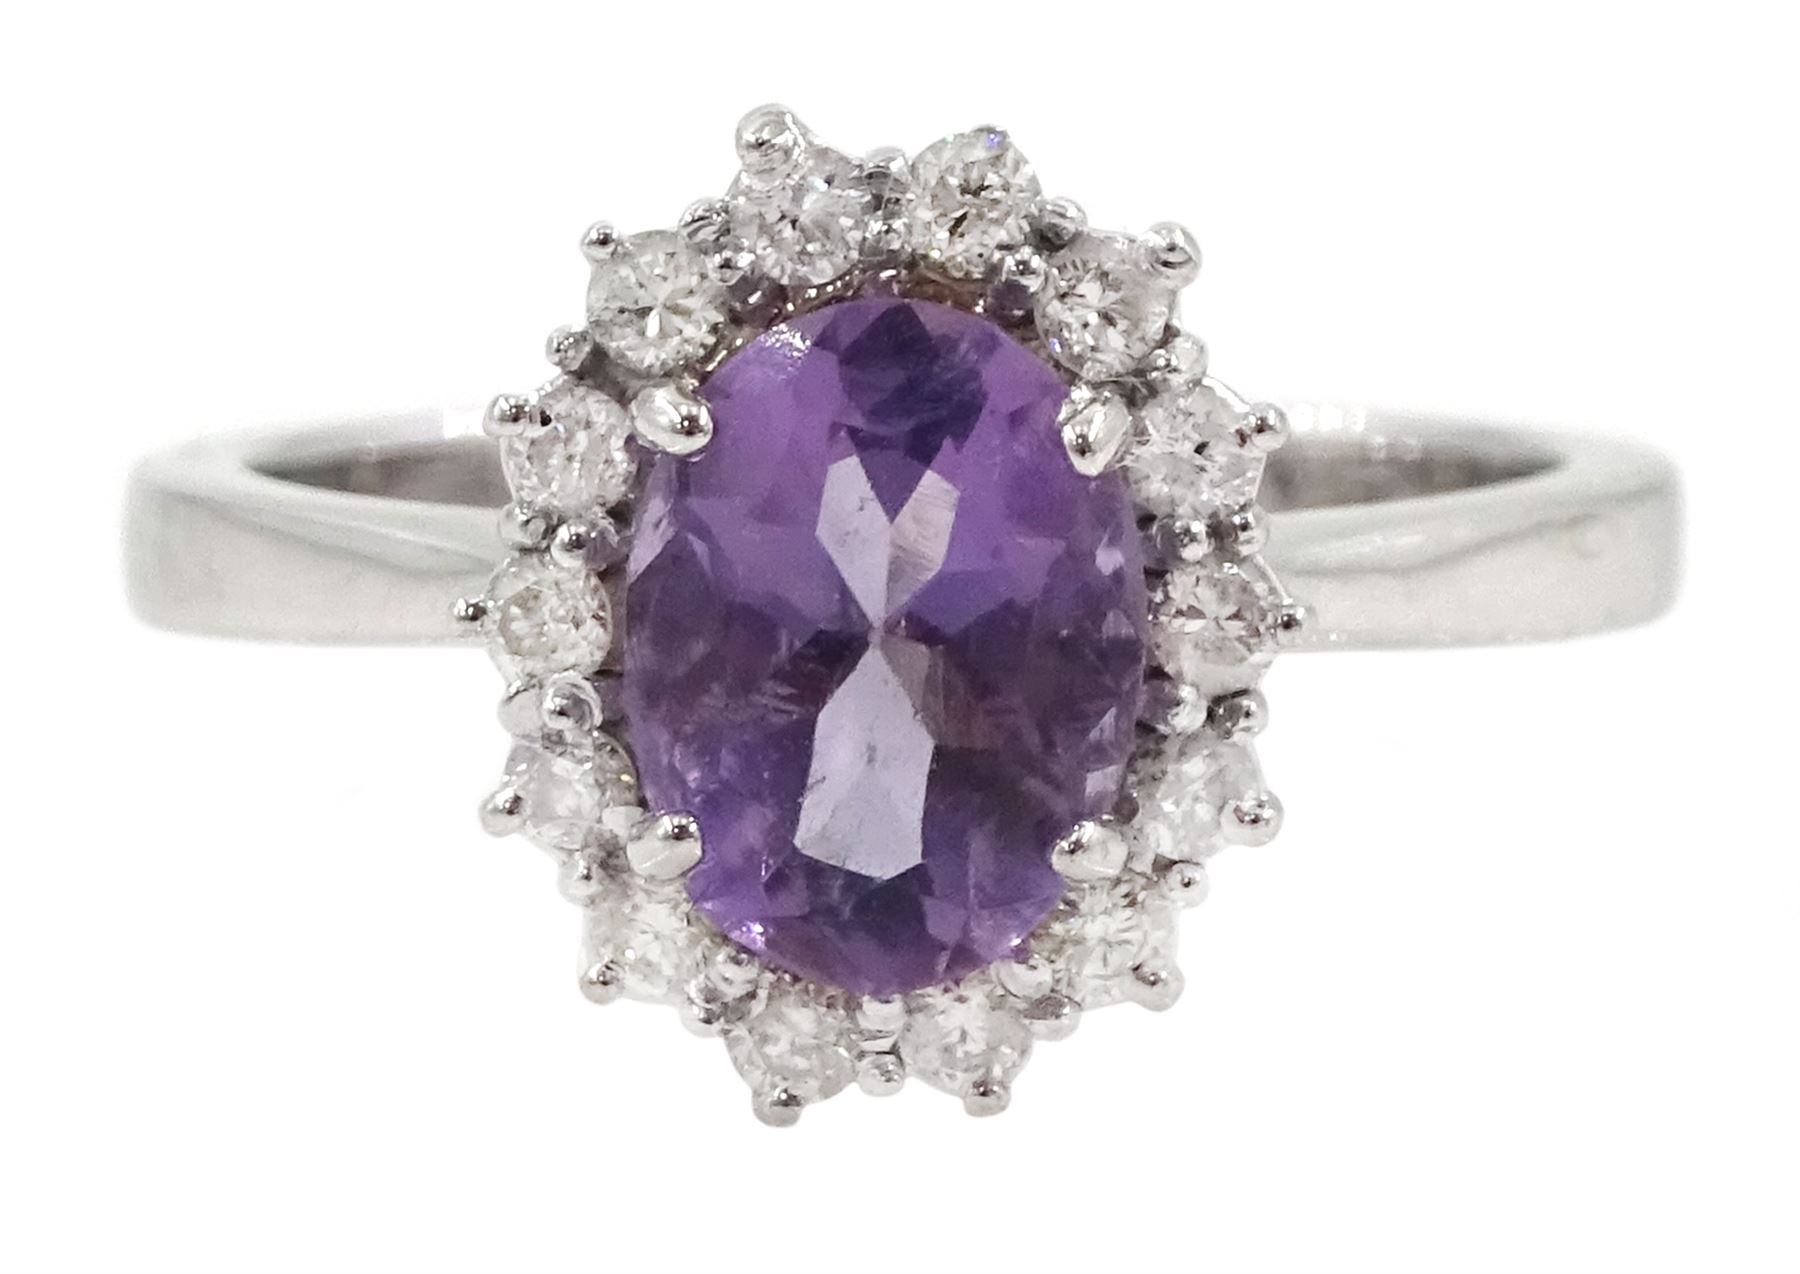 18ct white gold oval amethyst and round brilliant cut diamond cluster ring